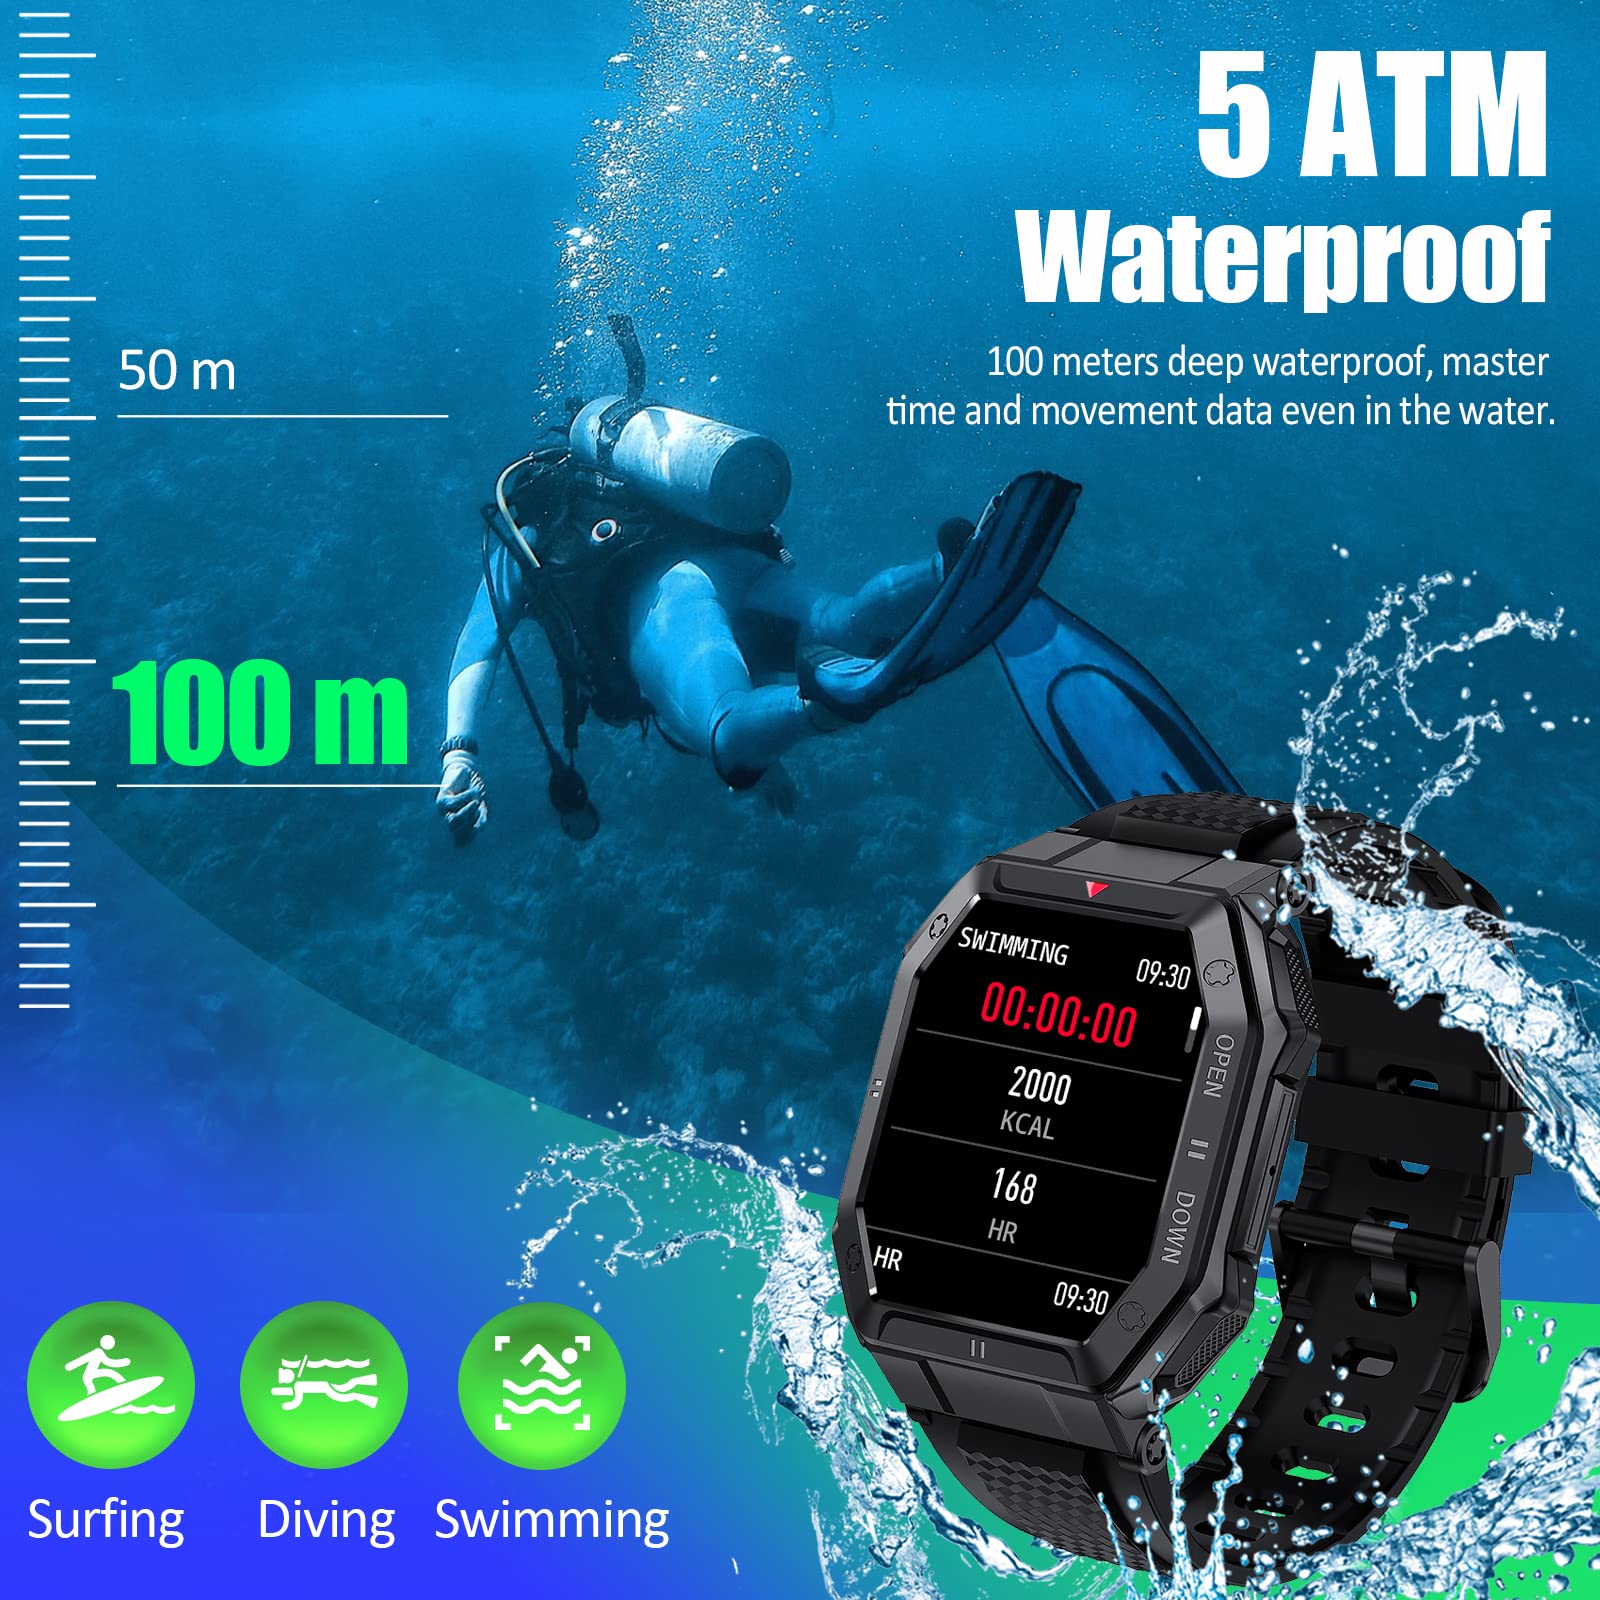 Military Smart Watch for Men 100M Waterproof Rugged Tactical Smart Watch 1.85 Inch HD Outdoor Sports Fitness Tracker Watch with Heart Rate Sleep Monitor Pedometer Smartwatch NO BLUETOOTH CALLING